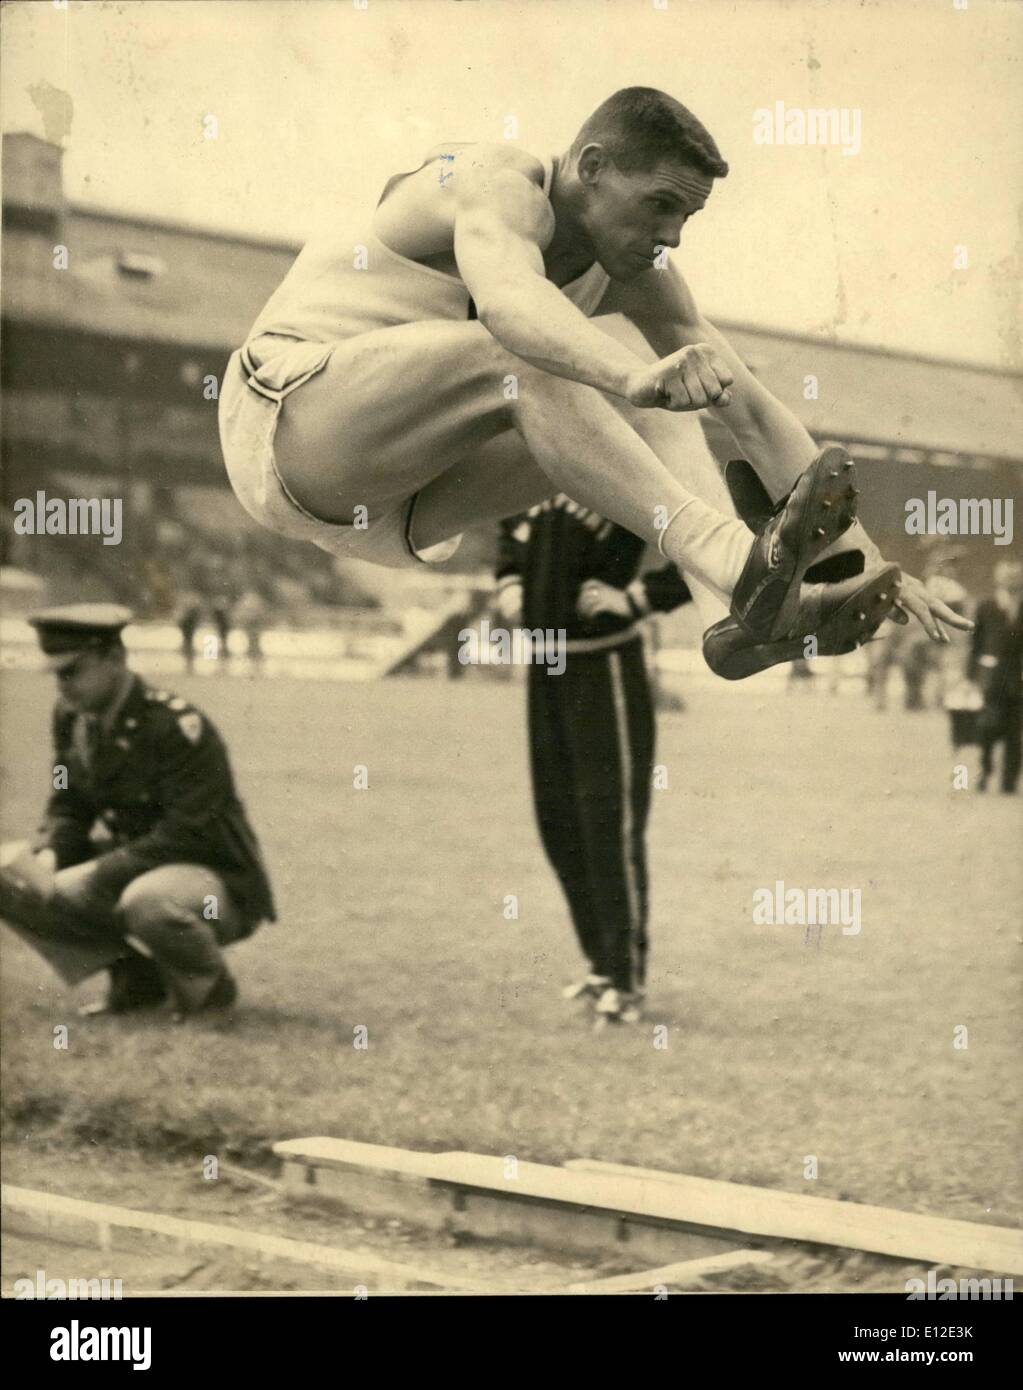 Dec. 20, 2011 - West Point Man In Long Jump R. Kyasky (west Point), of Ansonis, Connecticut, in the long jump at the Anglo-American Inter-University Meet between Oxford and Cambridge and West Point and Yale at White City, London, today June 11. Stock Photo